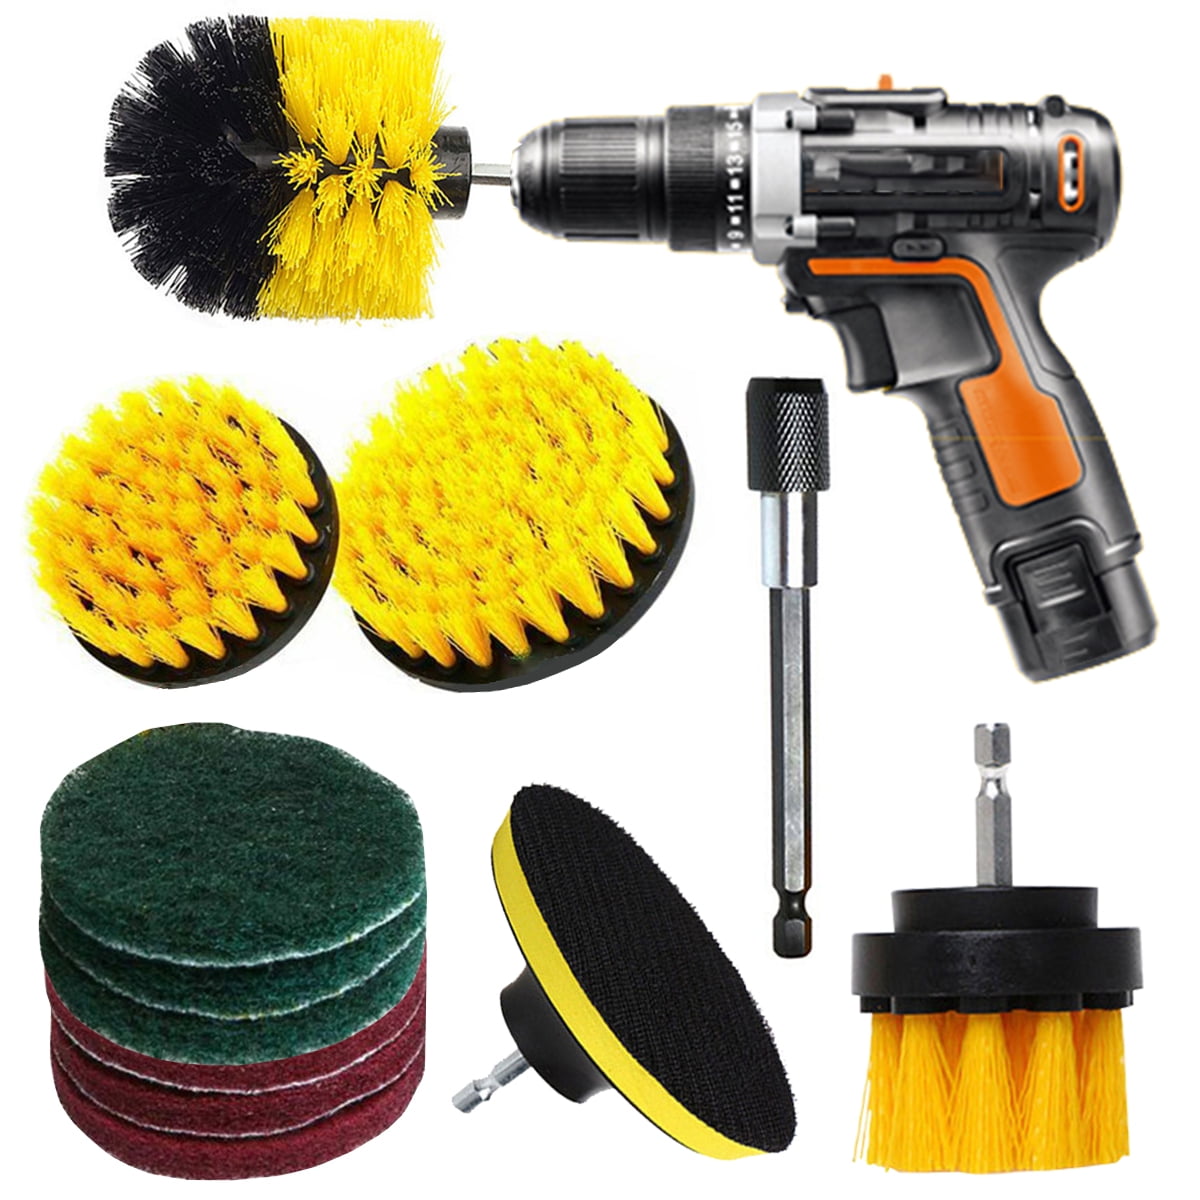 12pcs/set Cordless Drill Brush Power Scrubbing Combo Cleaner For Bathrooms Tiles 